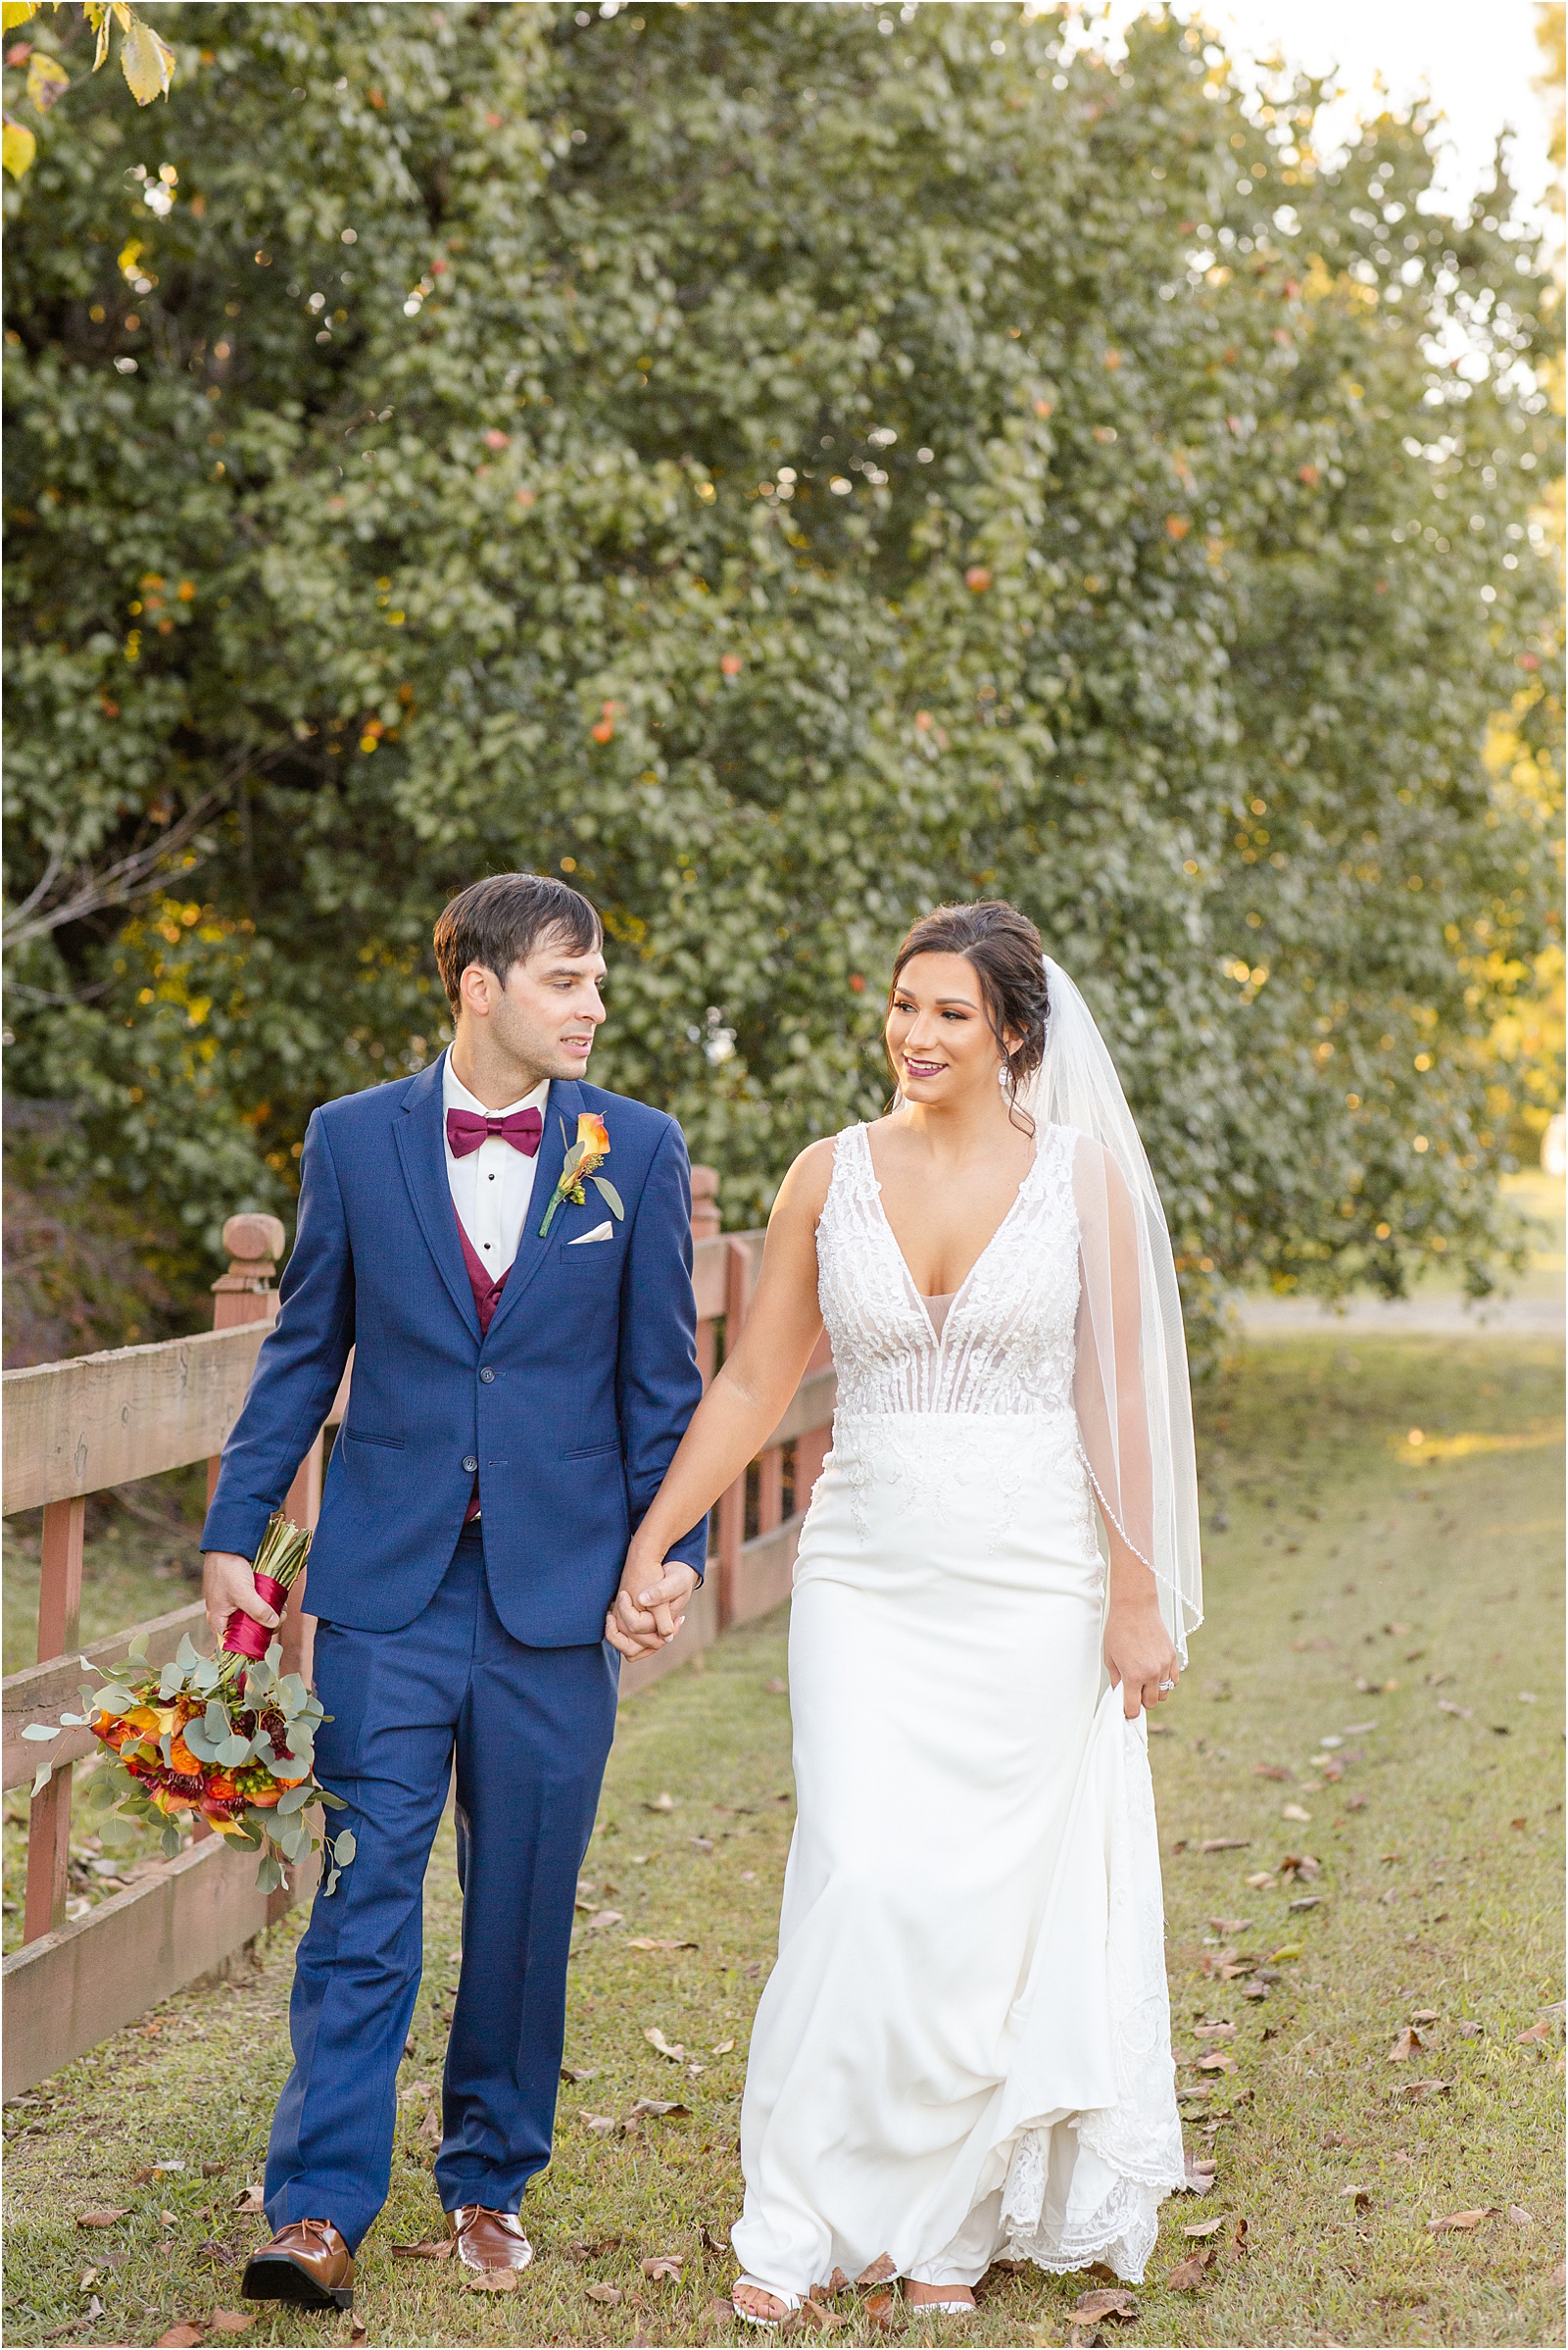 Groom and bride walk by wooden fence after wedding in Columbia, SC